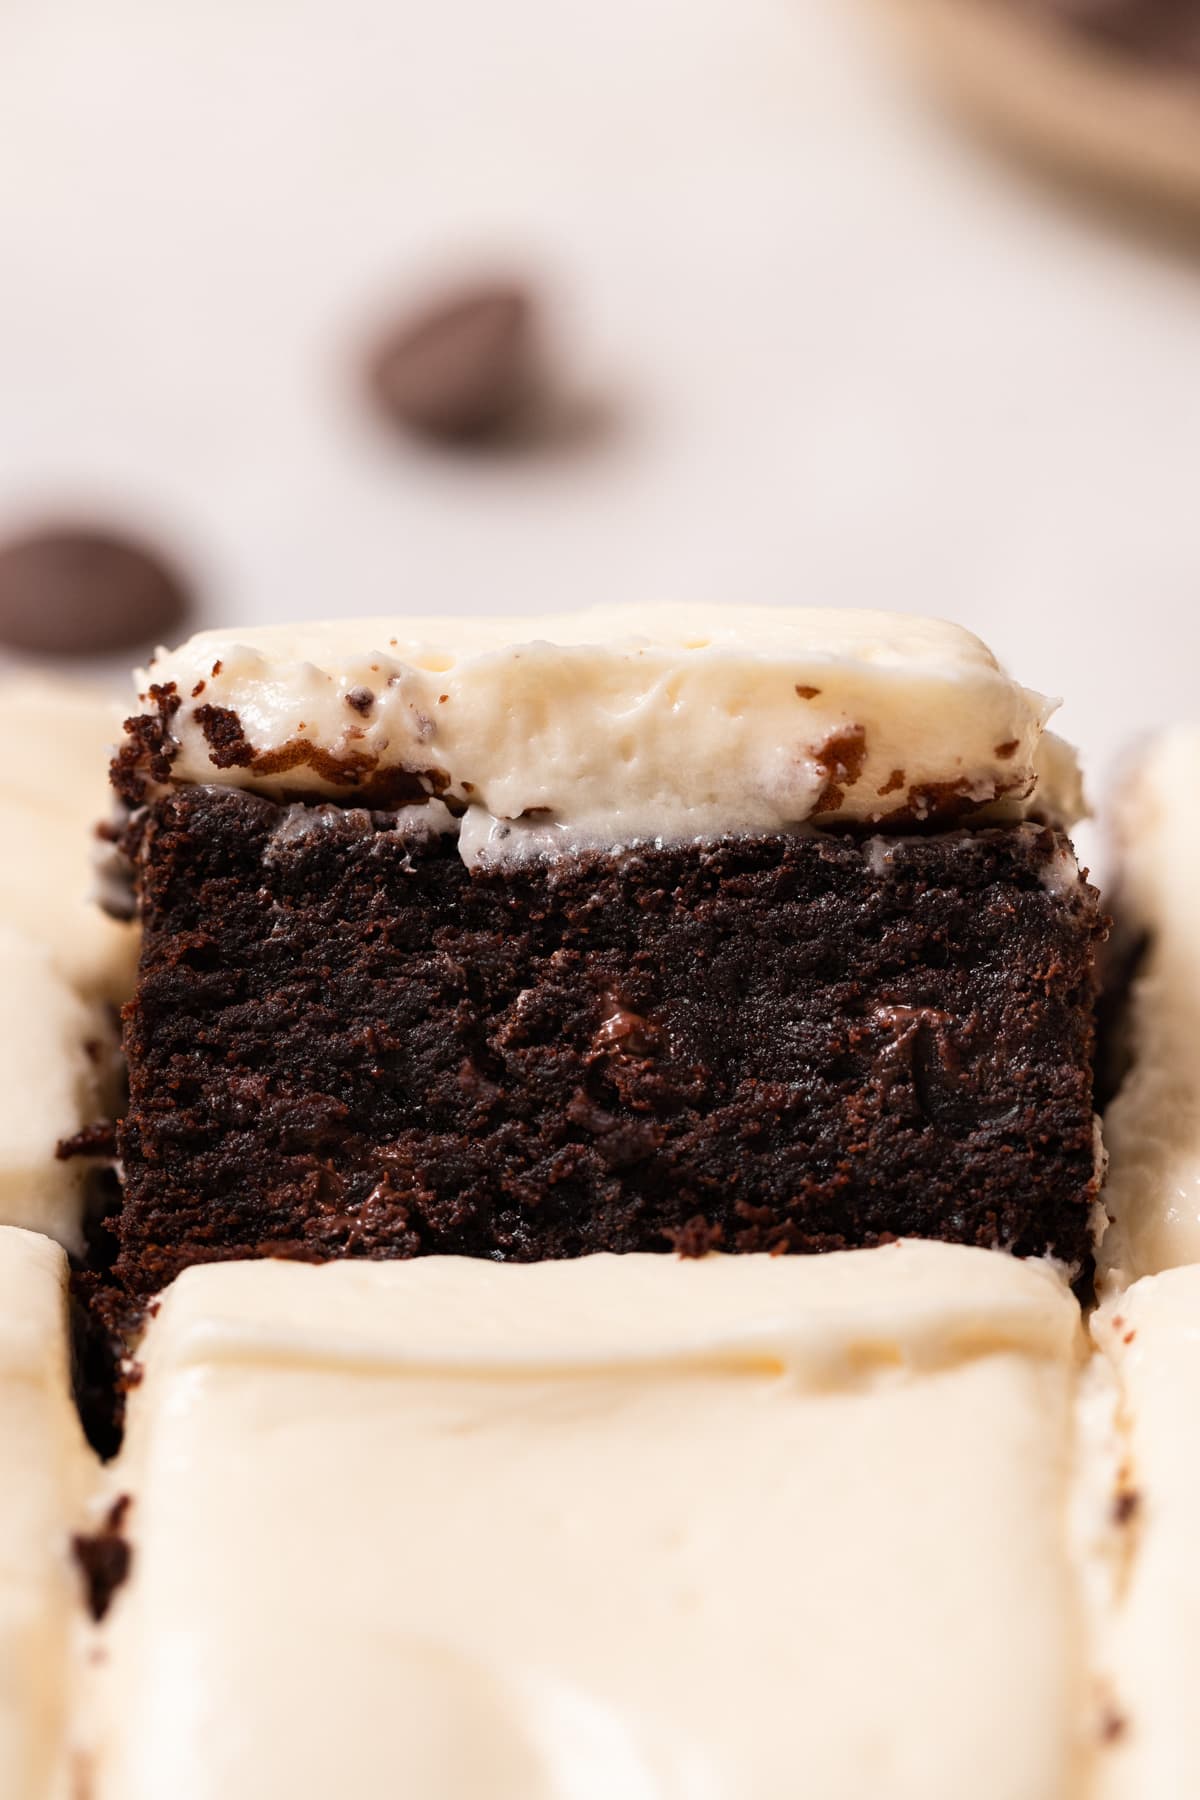 A brownie frosted with cream cheese frosting on a white surface.